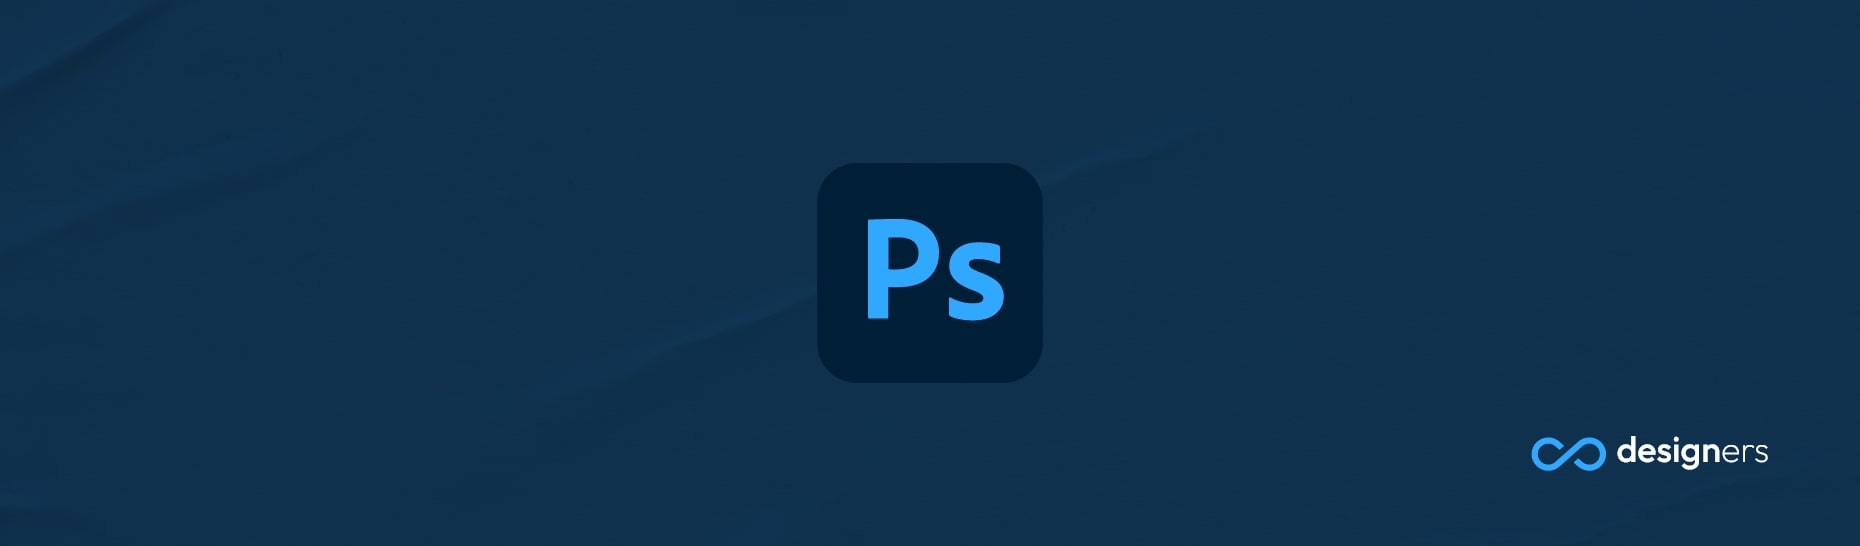 Can Photoshop Convert JPG to SVG?